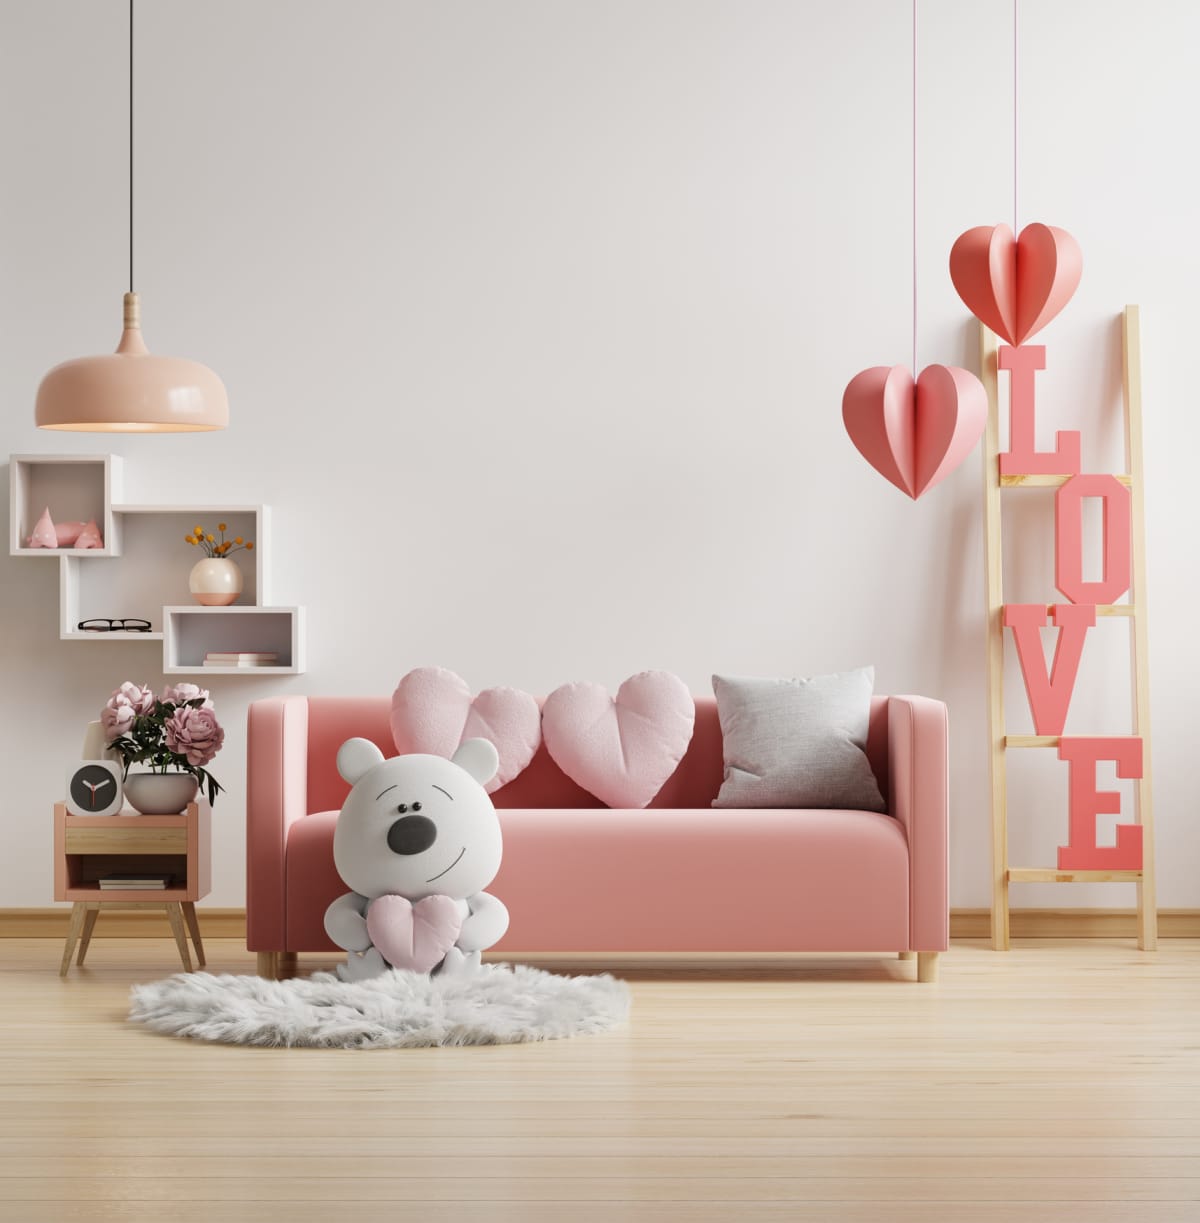 Valentine interior room with pink sofa and home decor for valentine's day.